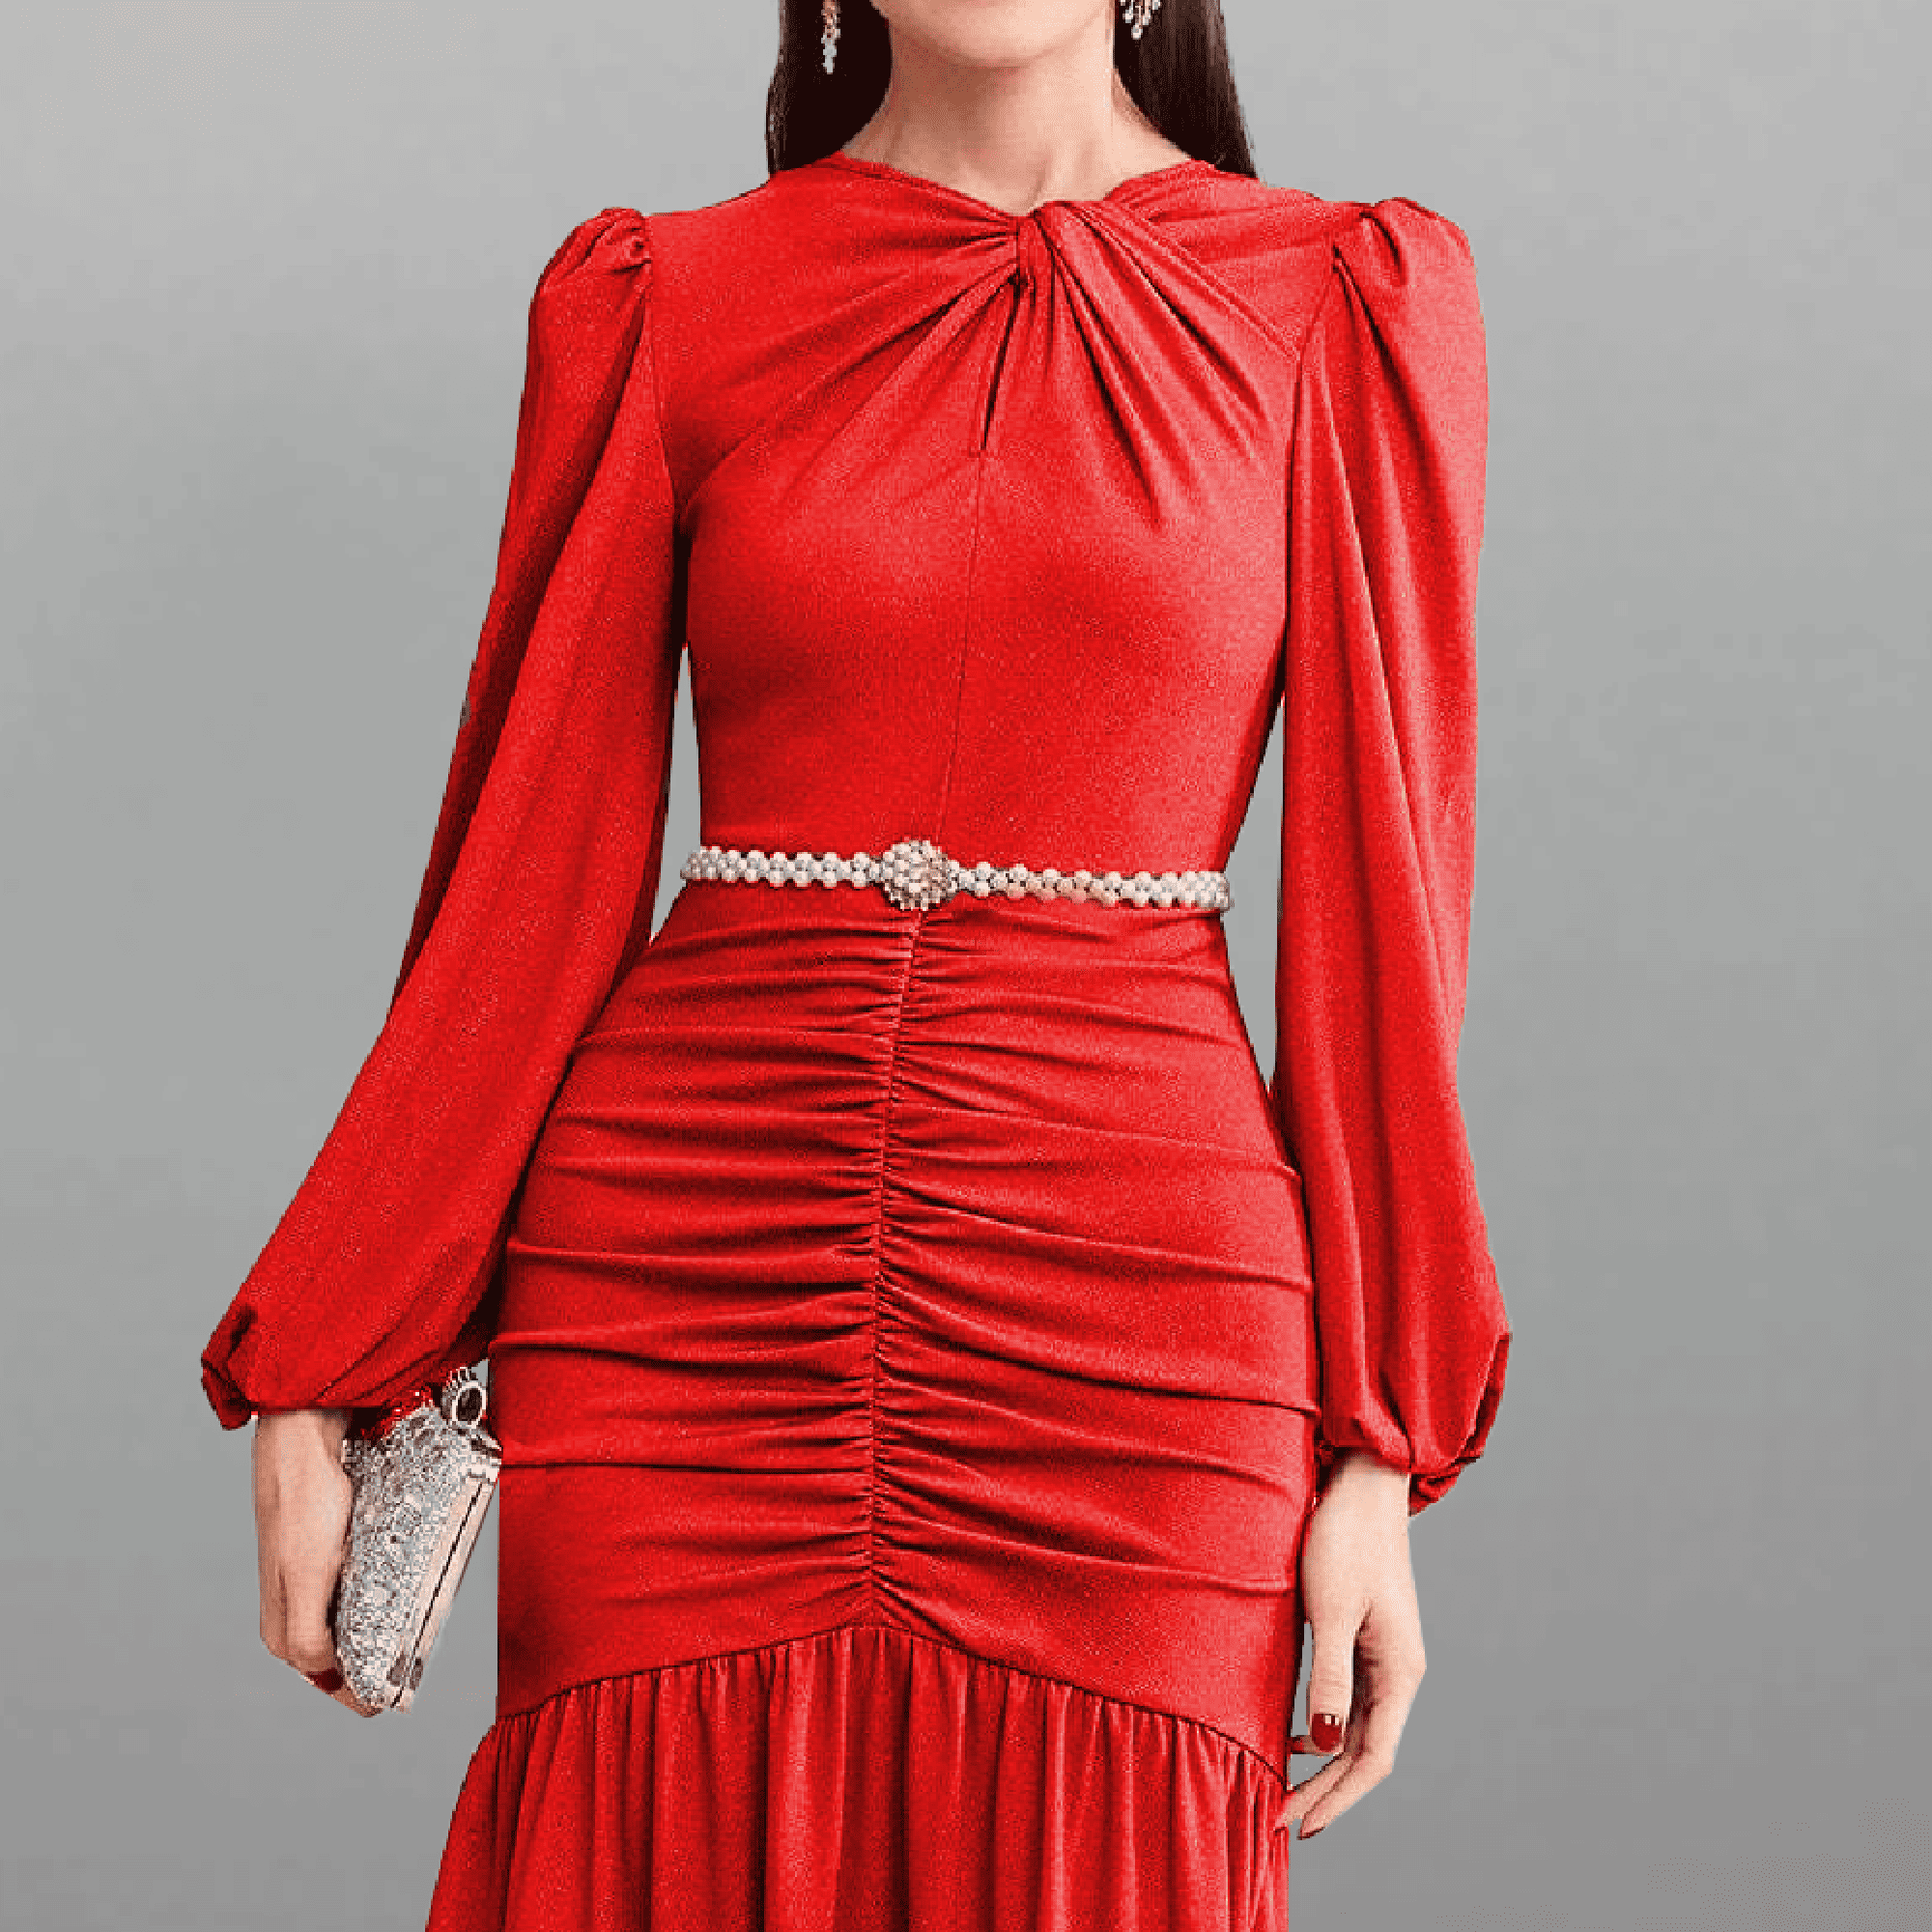 Women's Red Balloon sleeve dress with beaded belt-RED073